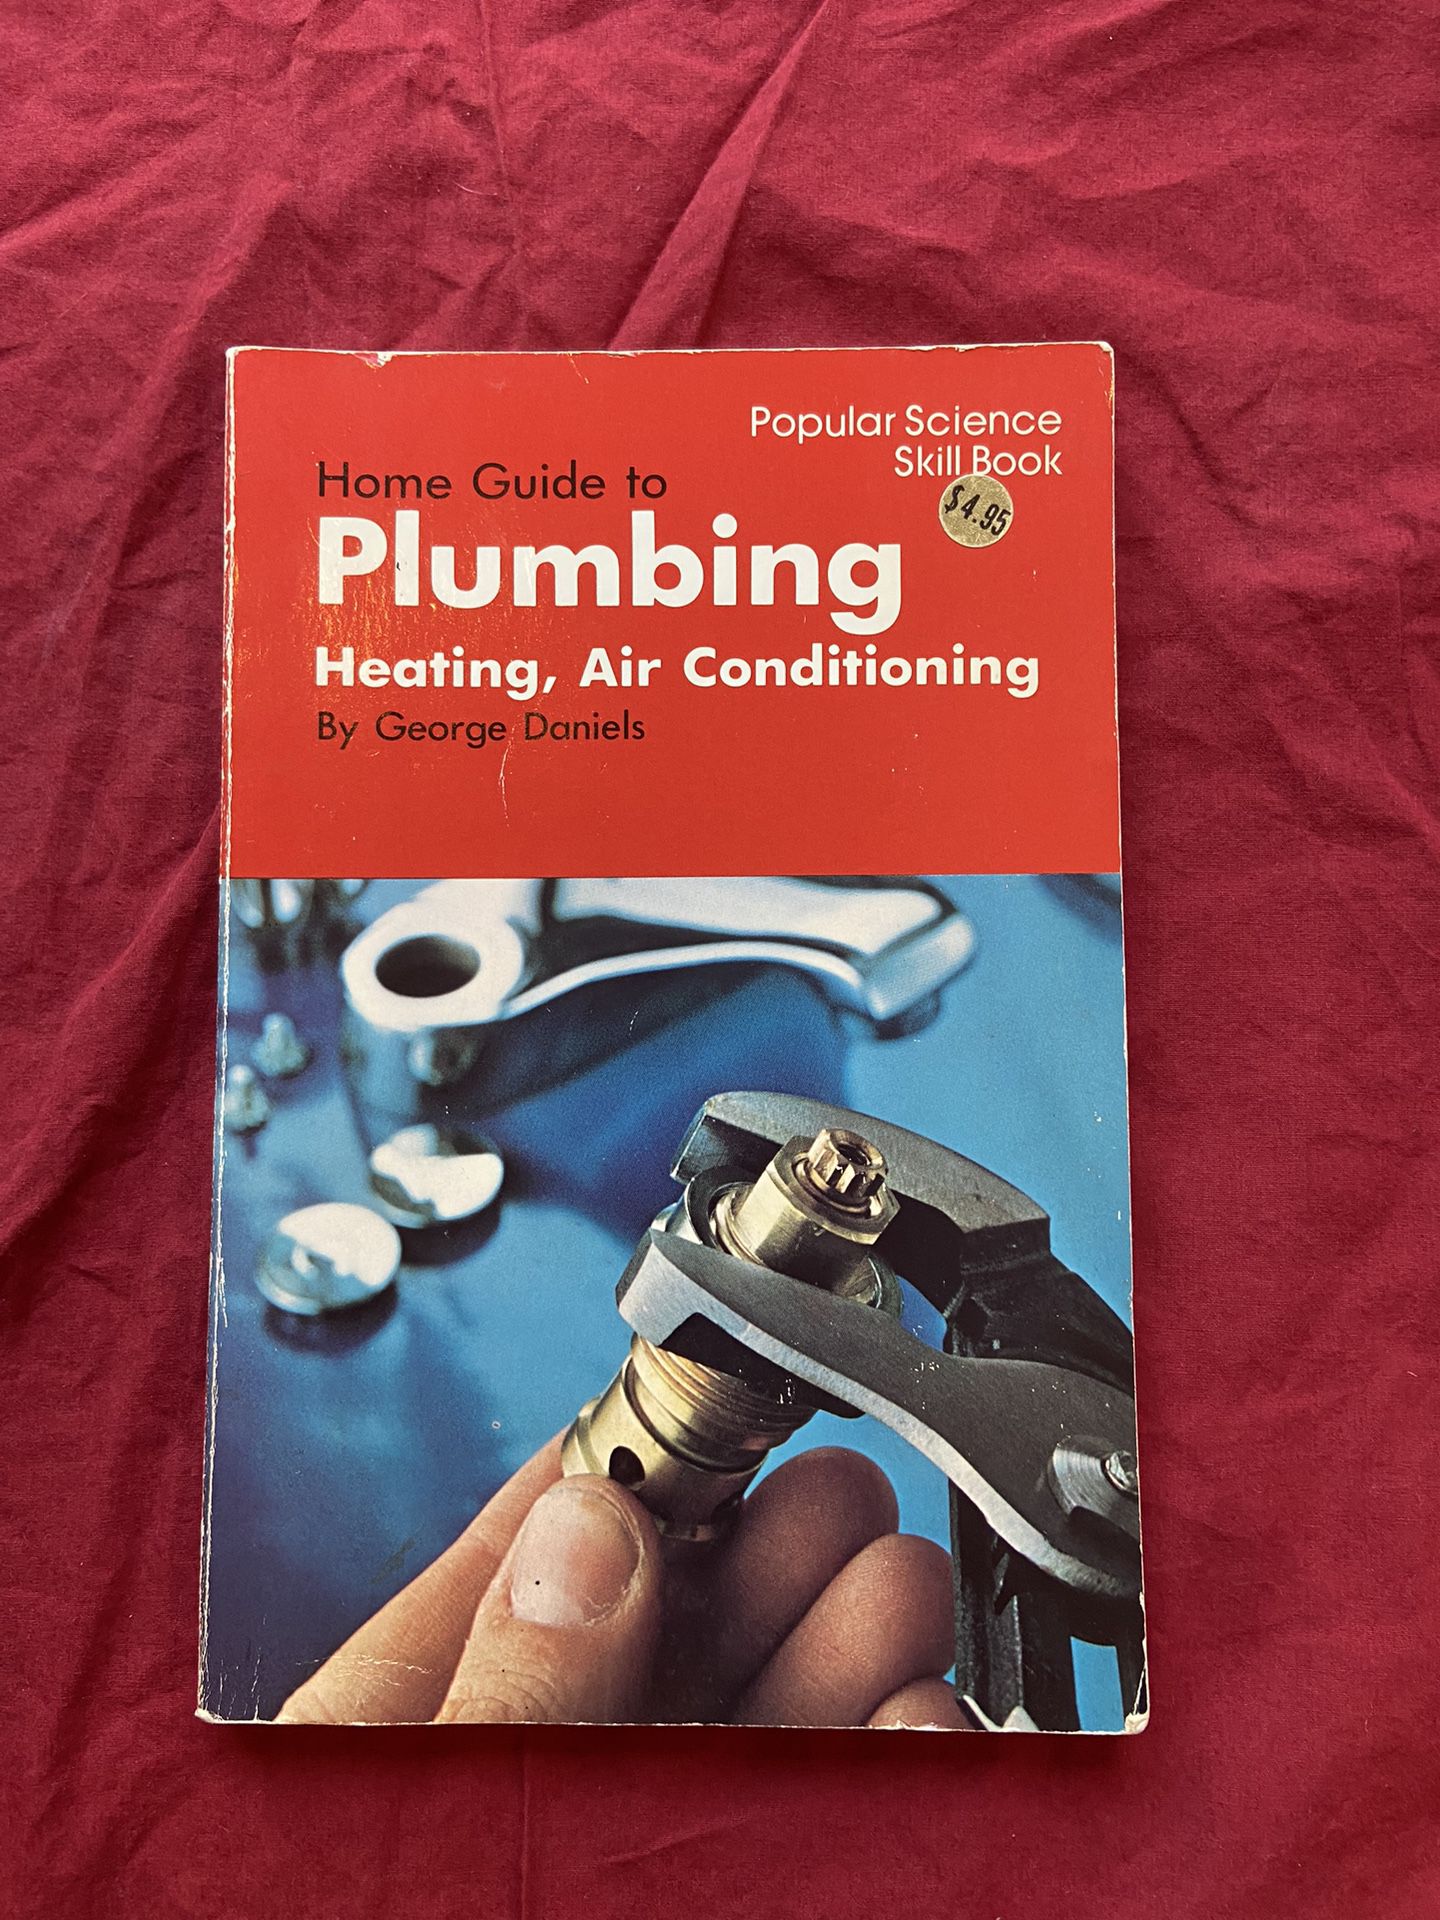 Home Guide to Plumbing, Heating Air Conditioning Book